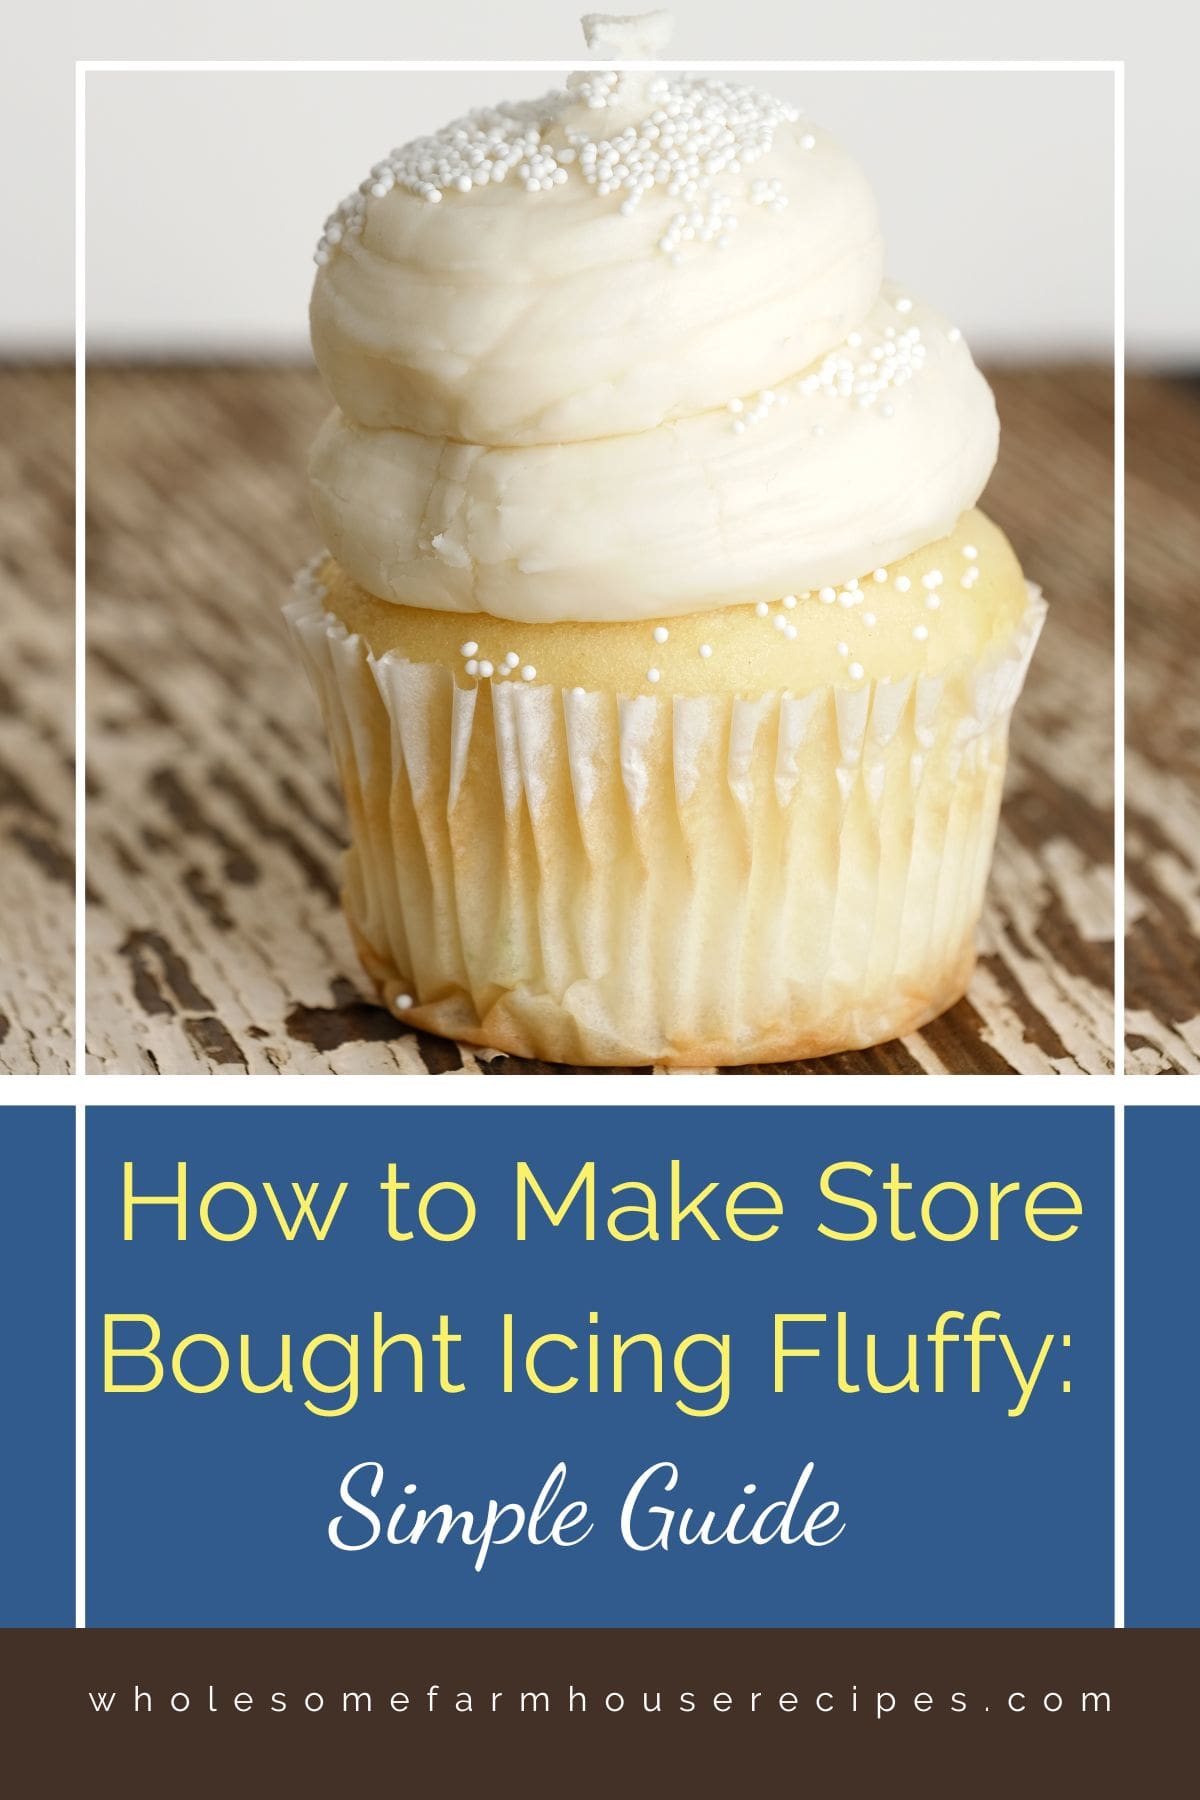 Do you want to make your store bought icing fluffy? It’s so convenient to use a can of frosting. When it comes to cake decorating, store-bought icing is a great way to save time. However, it often lacks the fluffy, airy texture, and for me the flavor of homemade buttercream frosting.